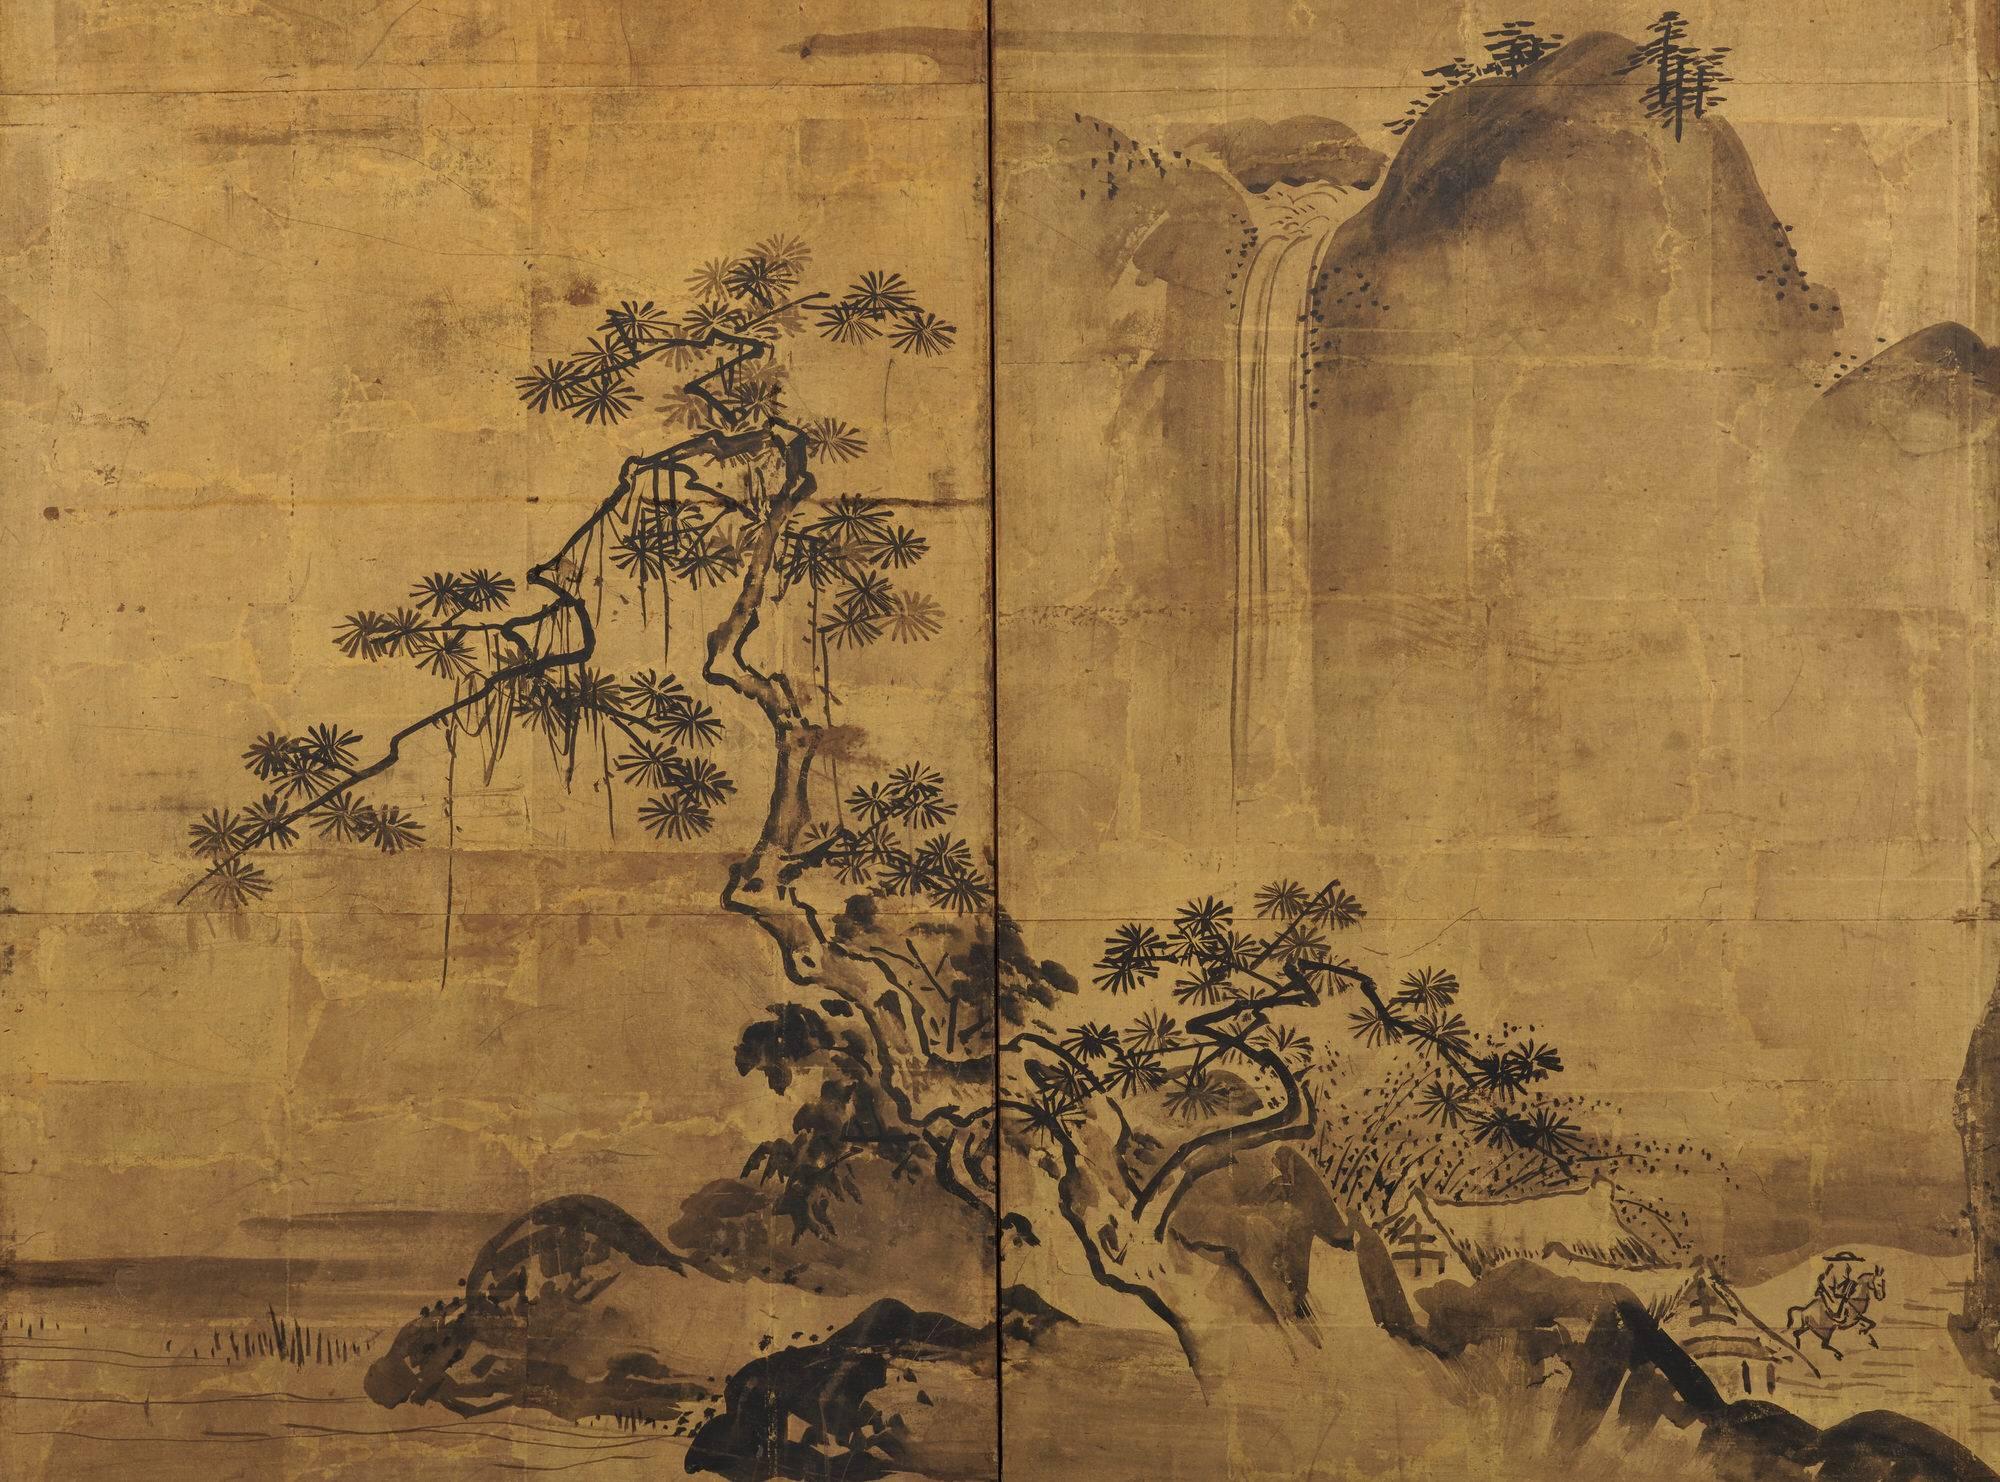 Kiyono Yozan (fl. 1688-1704)
“Views of the Xiao and Xiang”
Six-panel screen, ink and gold leaf on paper.
Inscription: Yozan
Seal: Issei
Dimensions:
105 cm x 258 cm (41” x 101.5”)
The eight views of the Xiao and Xiang was first developed in Chinese